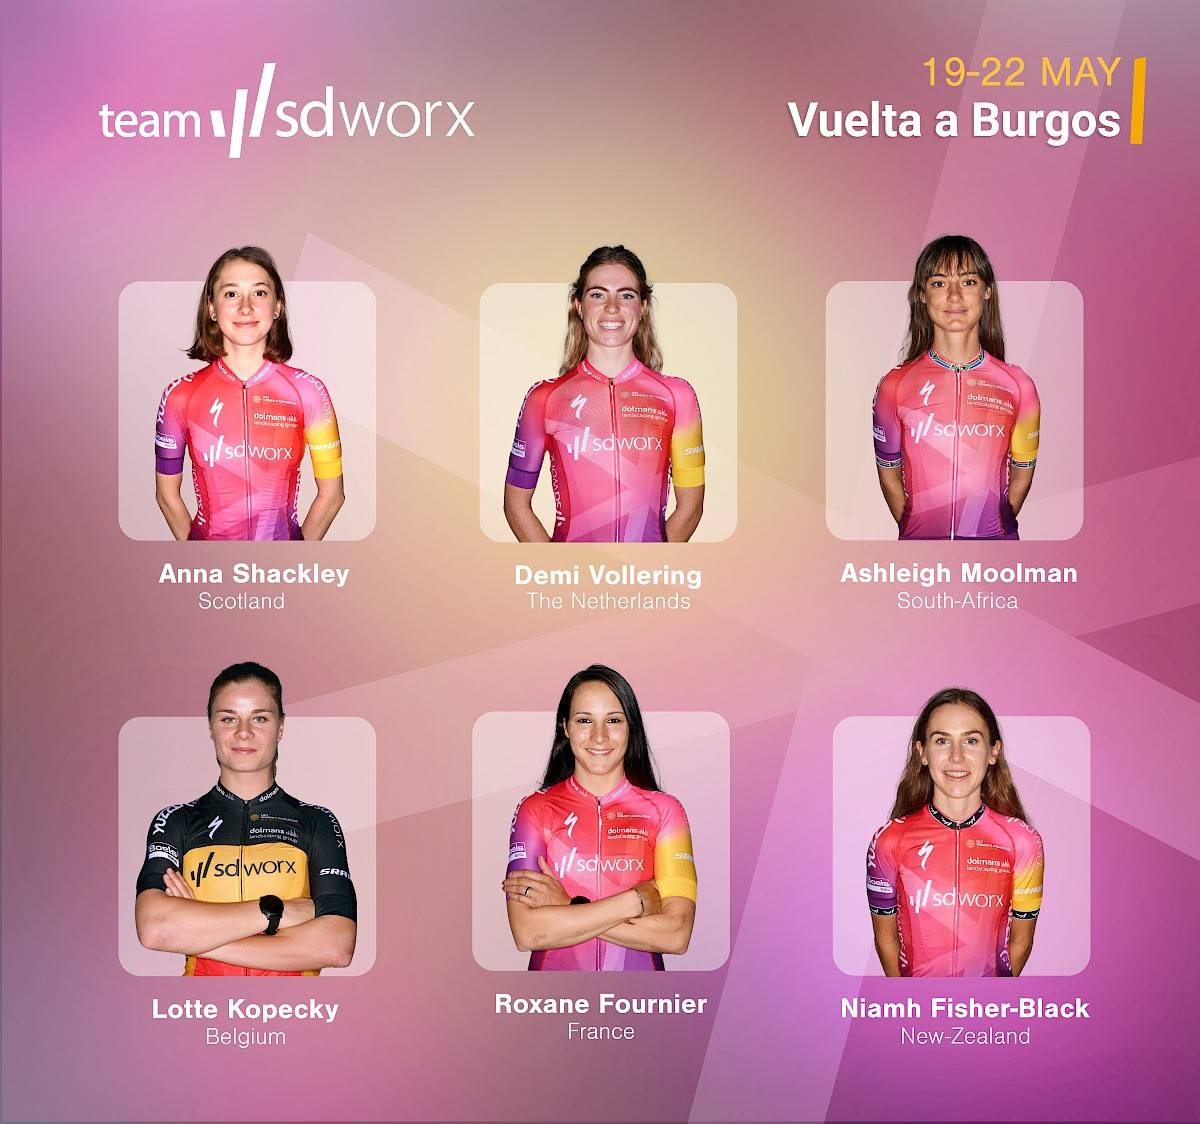 Lotte Kopecky returns to competition in Vuelta a Burgos